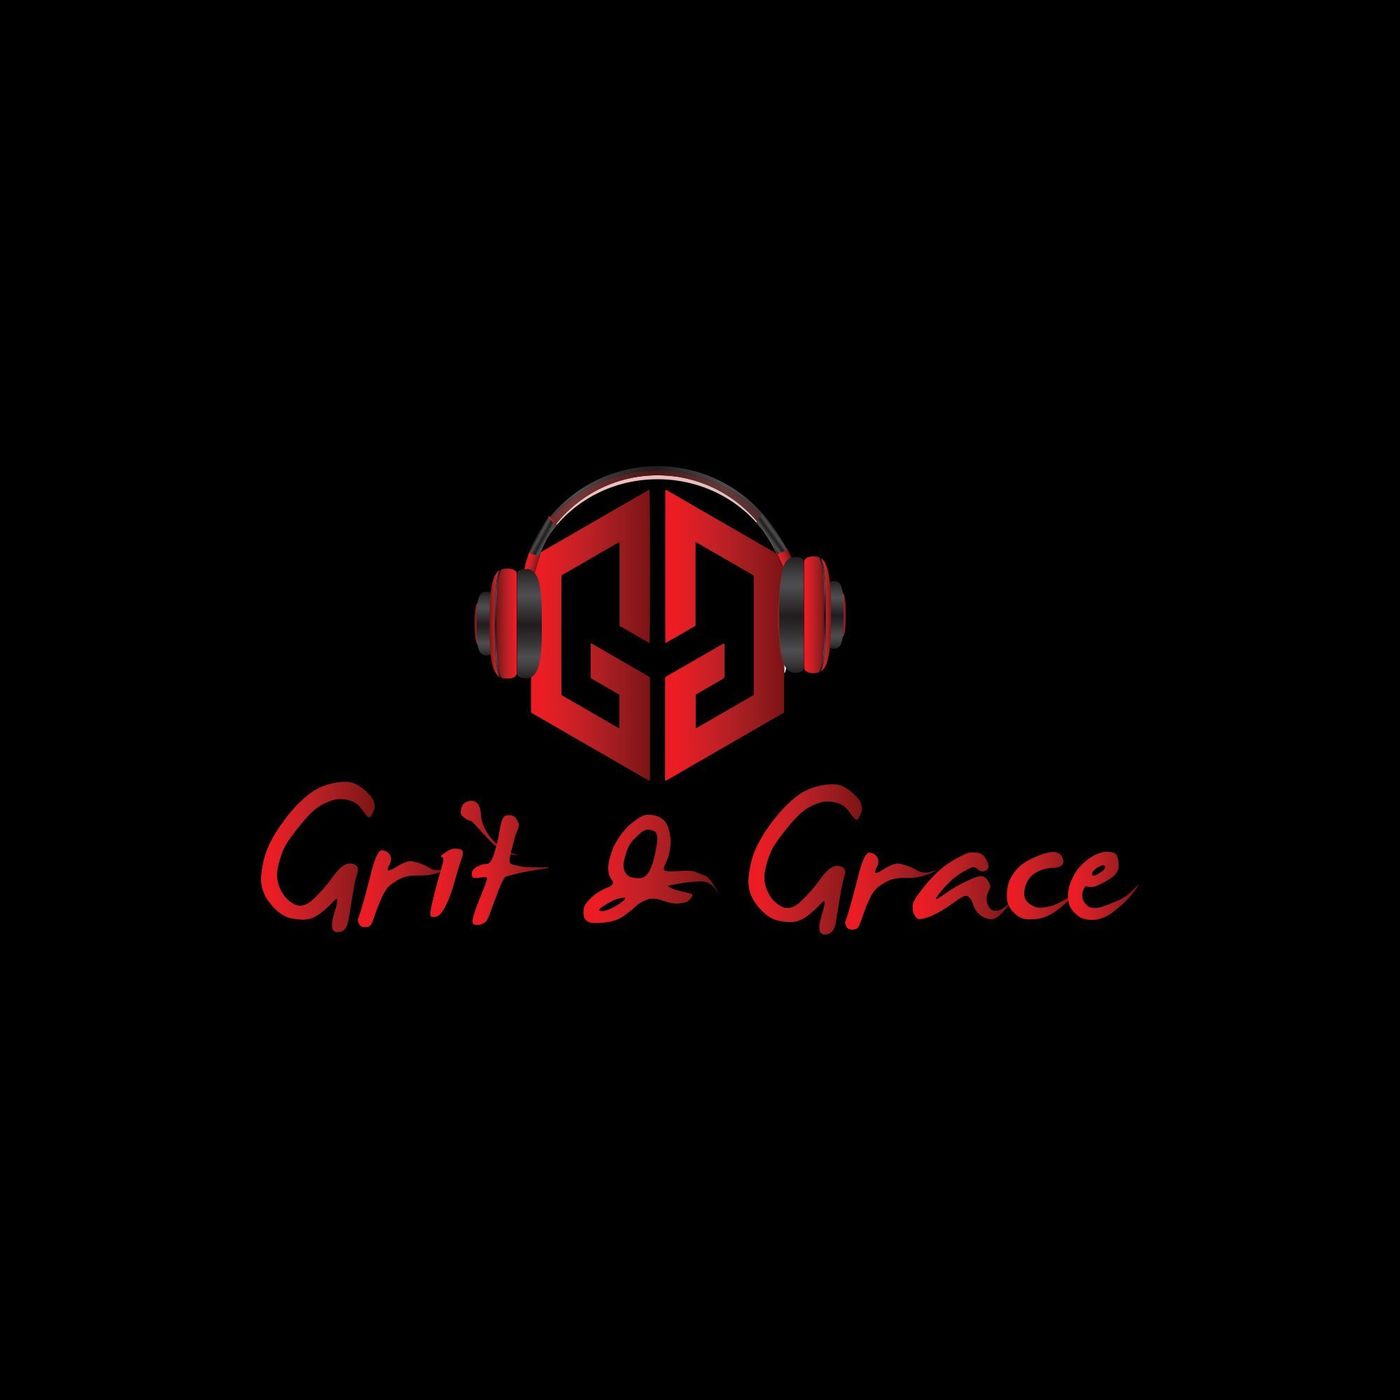 Grit and Grace: Finding Your Courage